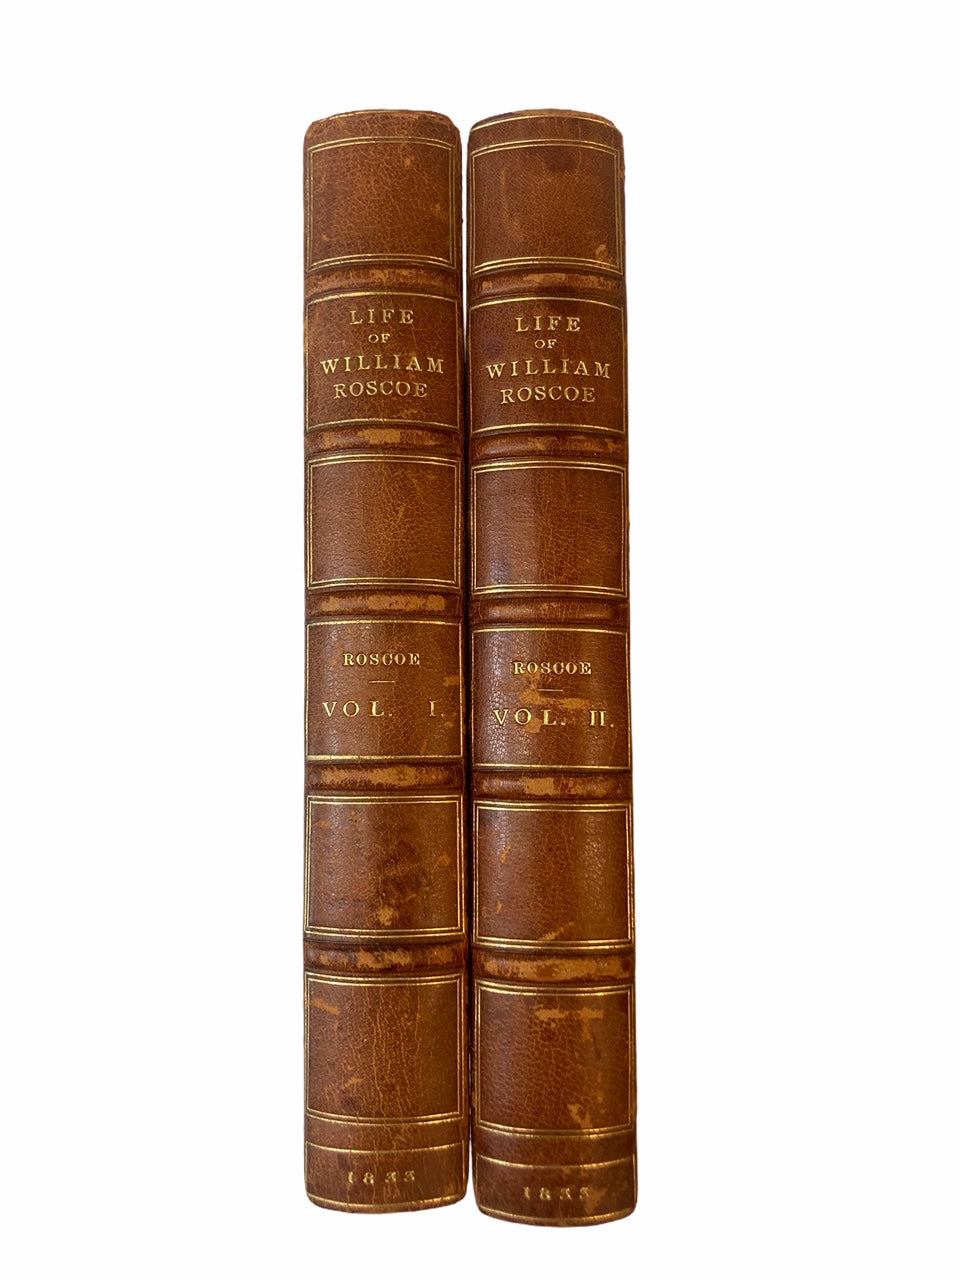 The Life of William Roscoe 2 Volumes Complete